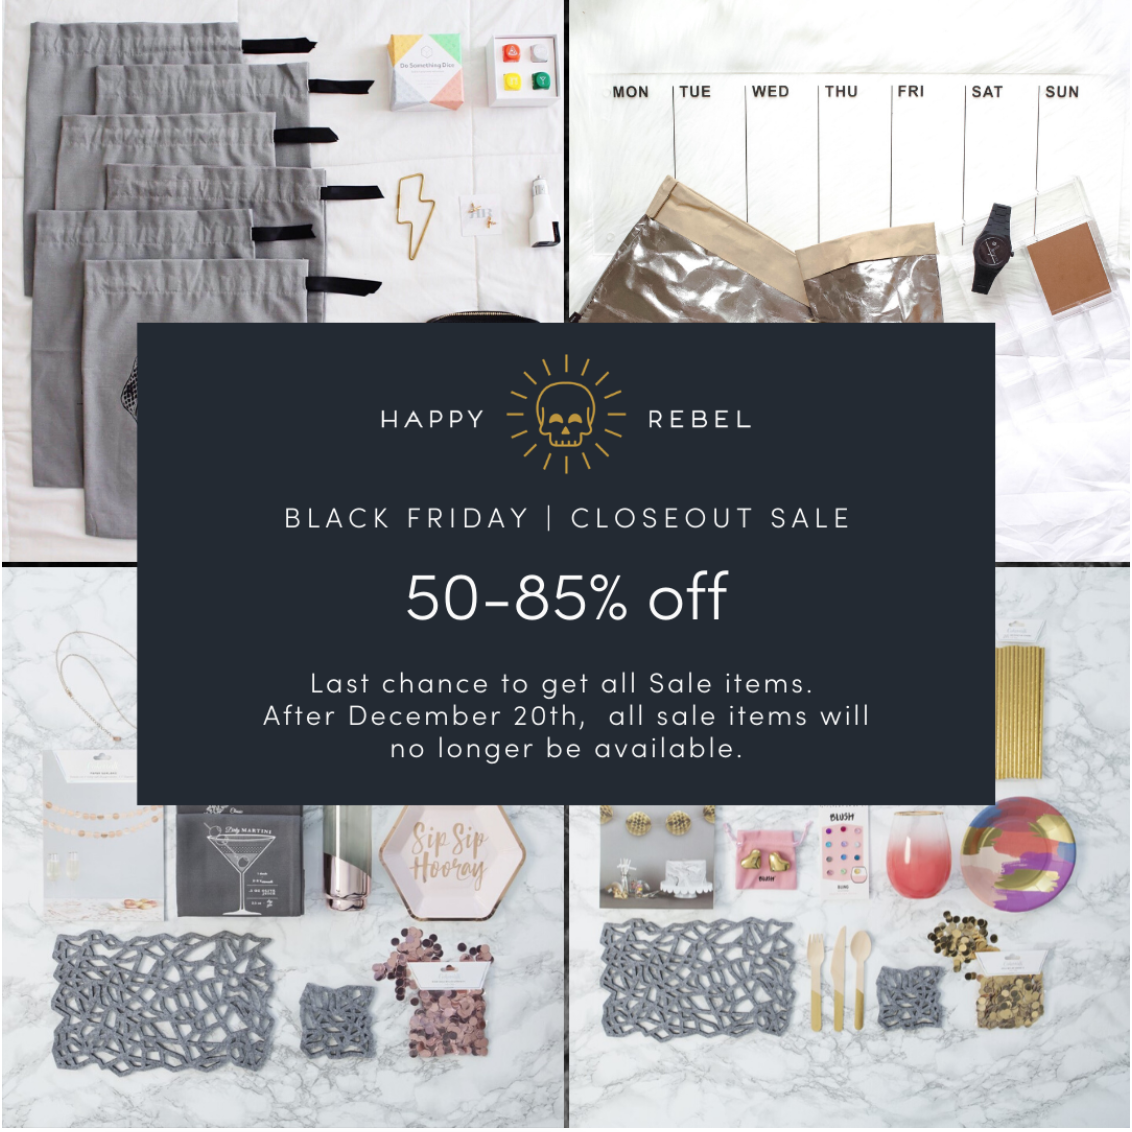 Happy Rebel Box Black Friday Shop Sale – Up To 85% Off!